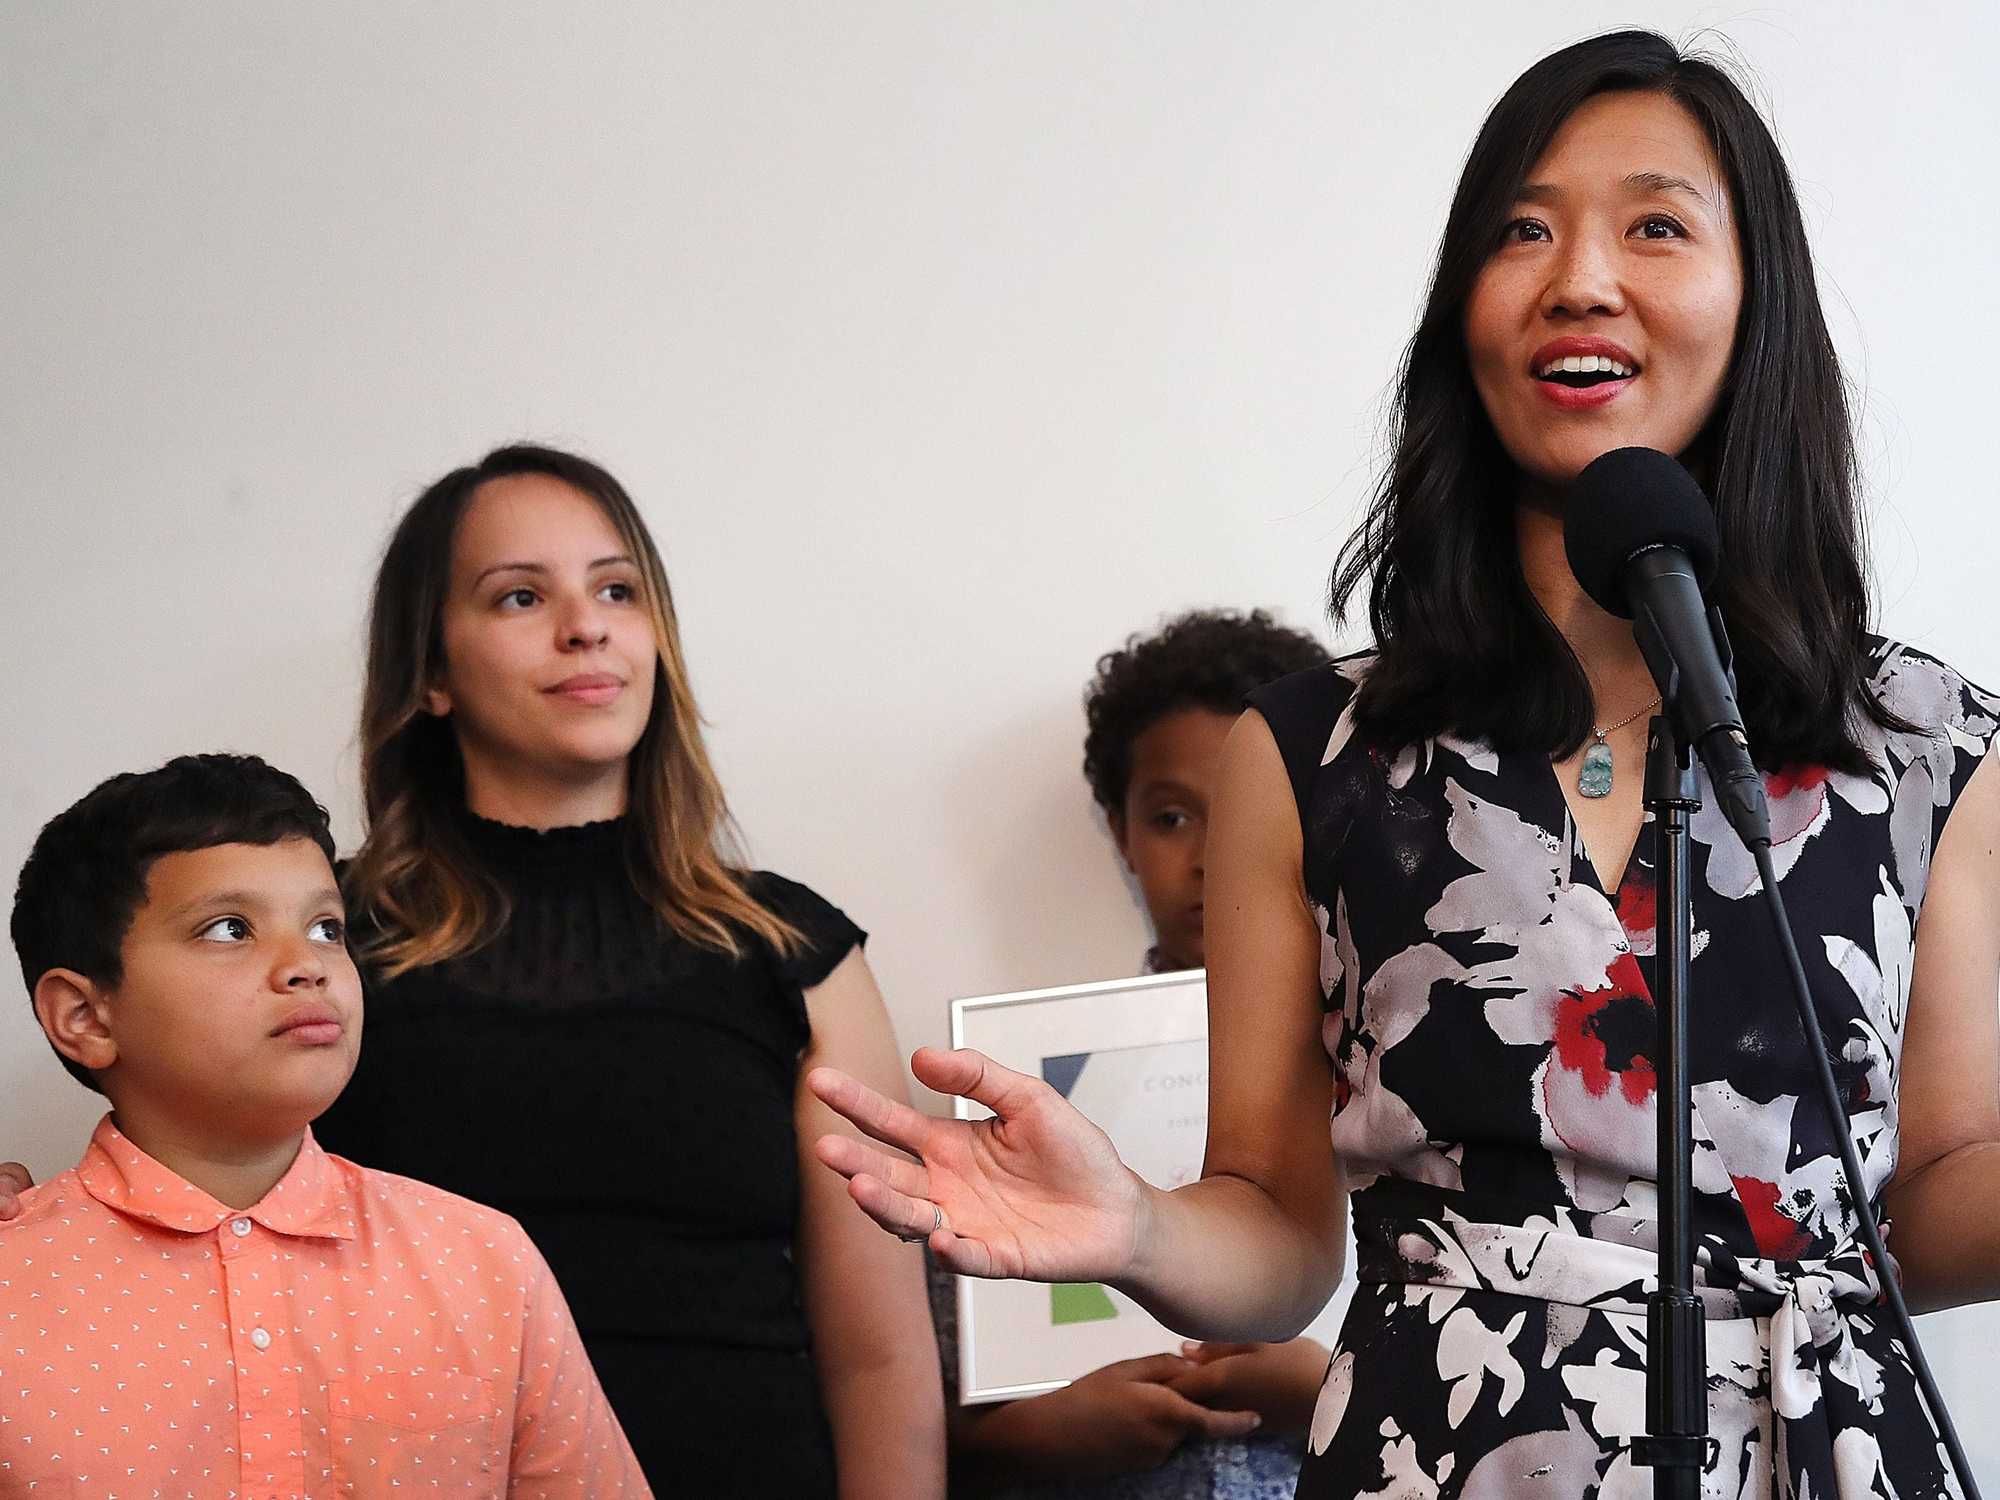 Dorchester-06/14//2023 Boston Mayor Michelle Wu speaks next to new homeowner, Gisselle Jimenez as her son, Elias looks on during a ceremonial home closing at a real estate company in Dorchester. Jimenez was able to close on a home through the Section 8 to Homeownership program, part of Boston’s One+BostonHomebuyer program. John Tlumacki/Globe Staff (metro)